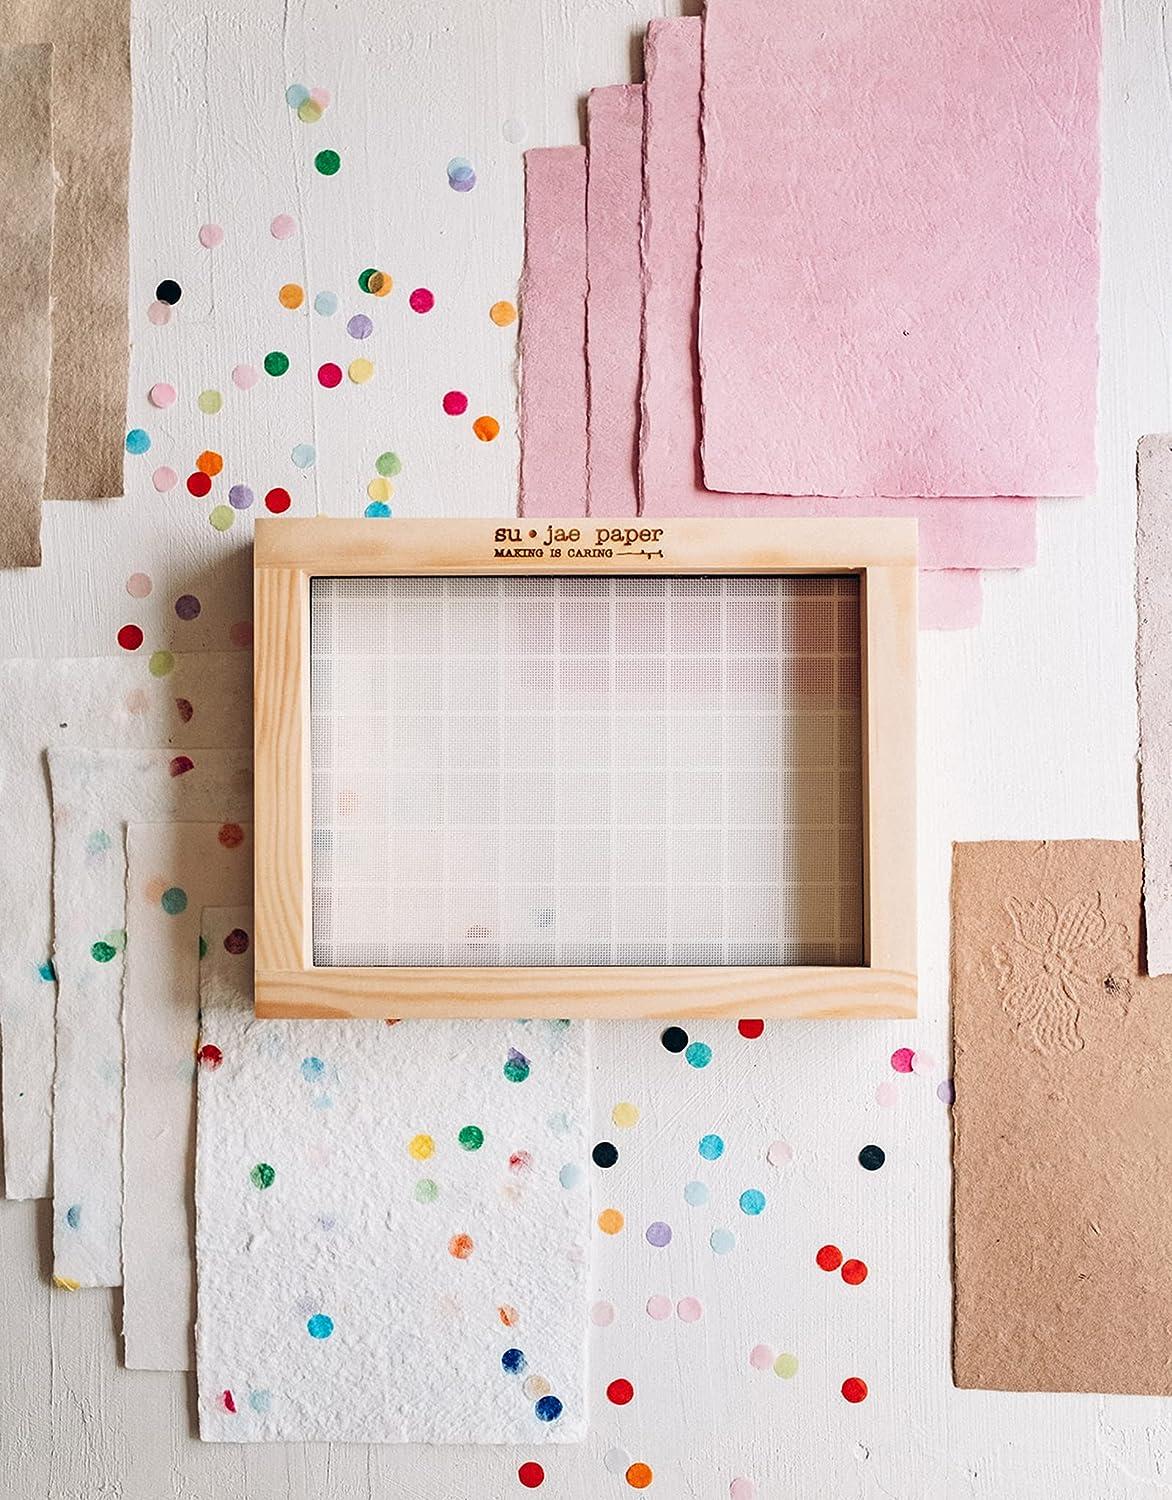 Waterproof Paper Making Screen Kit to Craft Your Own Handmade A4 Paper: Wood Deckle, Mesh Screen, Plastic Grid, Confetti, Sponge, 4 Couch Felts 